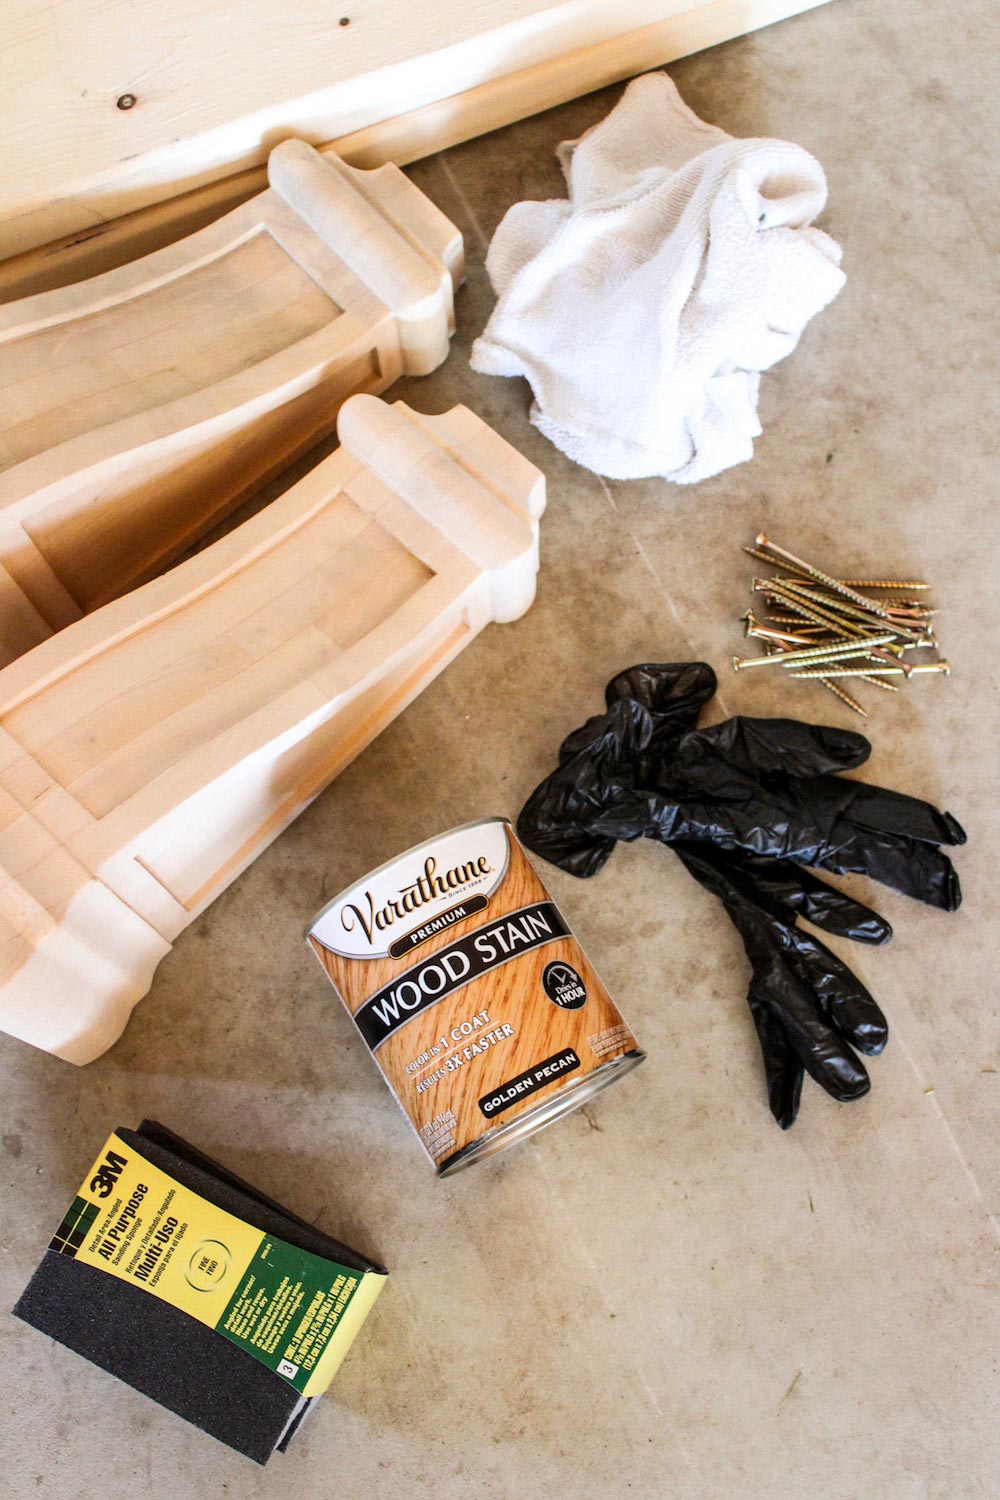 Various tools and materials needed to build and stain a wooden wall shelf.